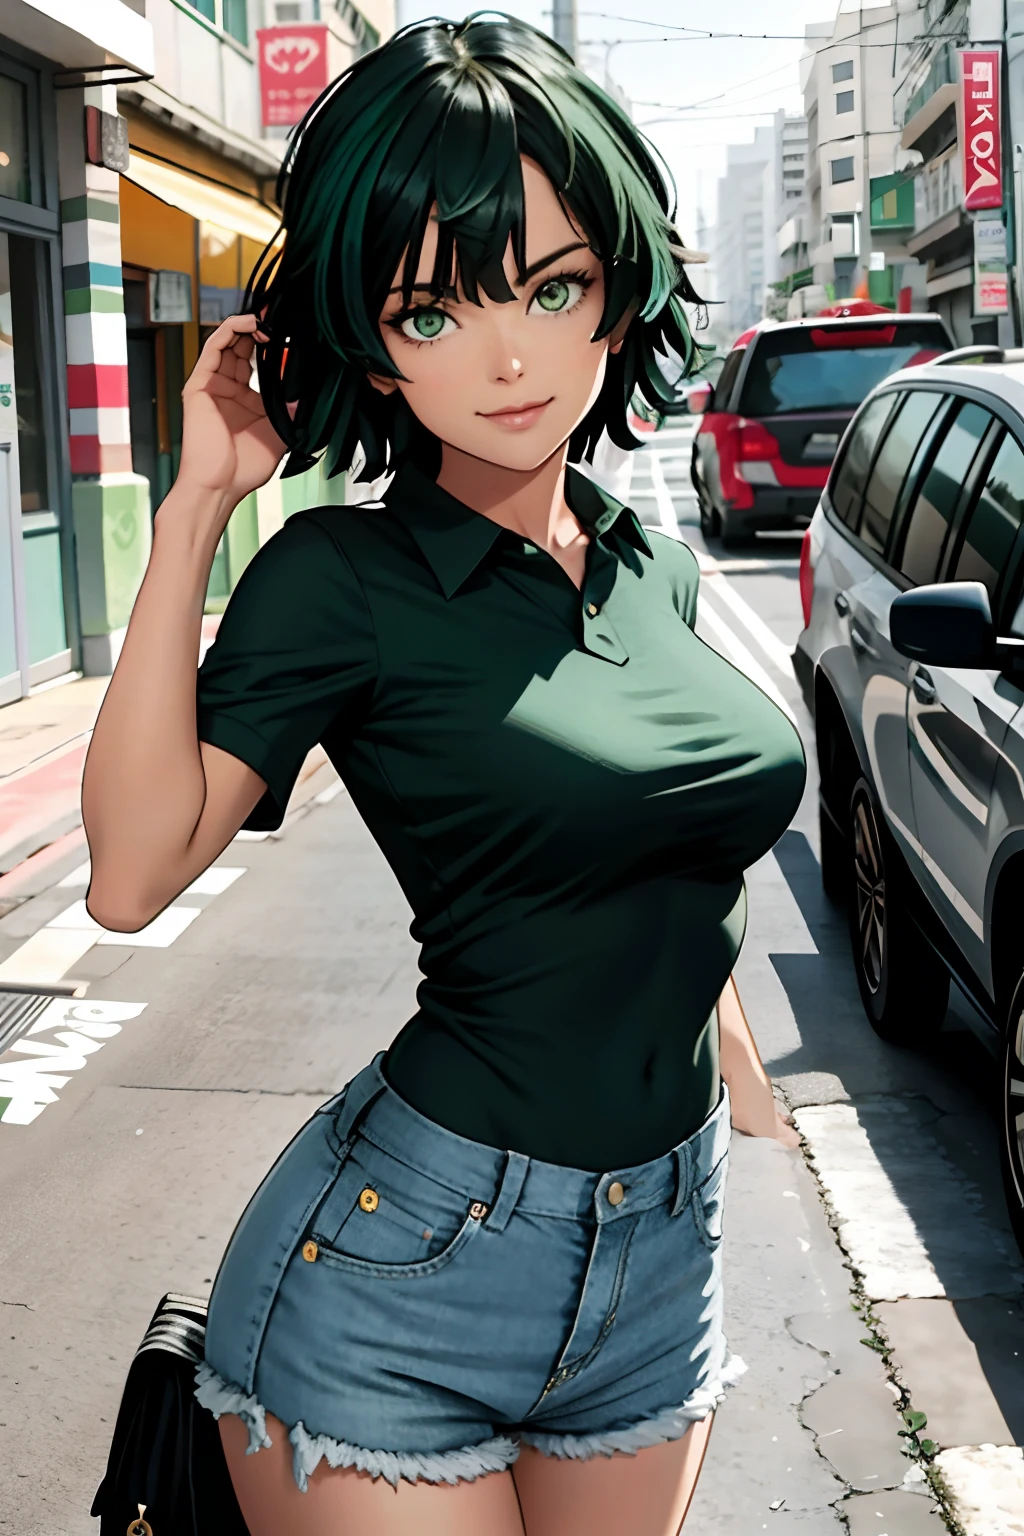 "A girl，Masterpiece level job，Better image quality，in front of camera，neckline，smile，Sexy servant，looks directly at camera，By the shorts，perfect bodies，city ，green hair，casual clothes, Street clothes。big breasts